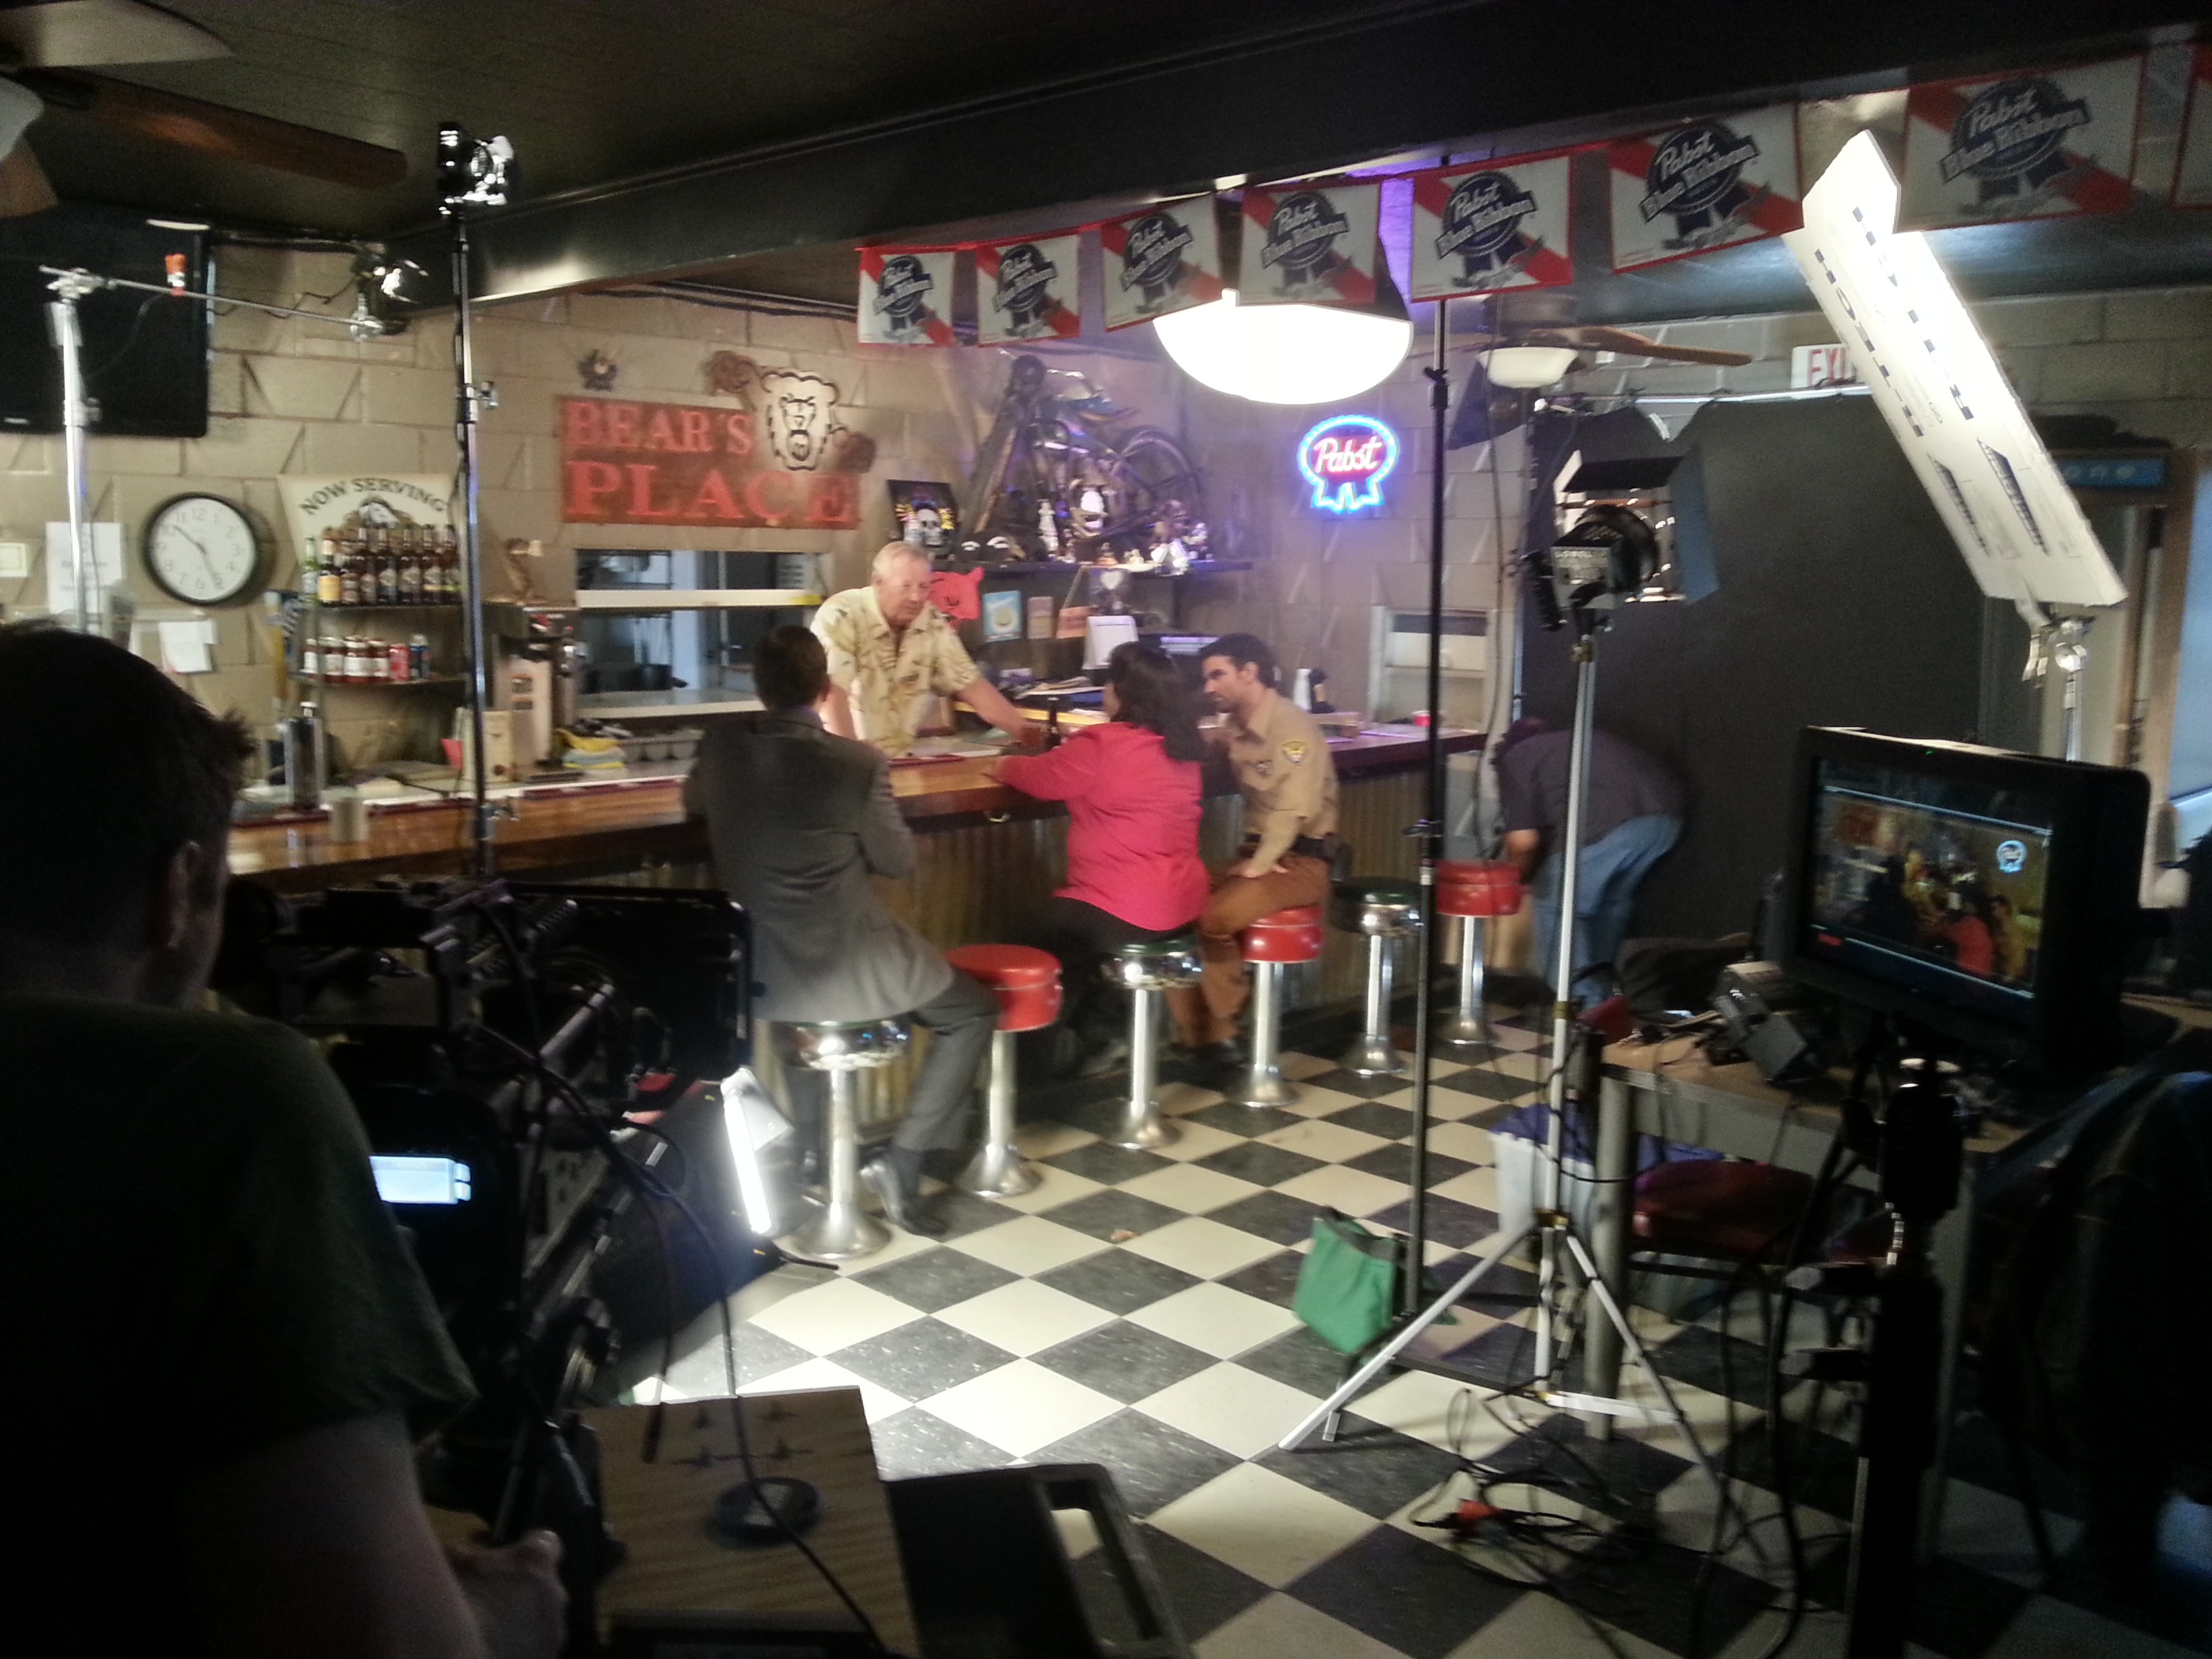 Shooting on-location at Bear's Place in Fayetteville, Arkansas, for THE PHONE IN THE ATTIC.